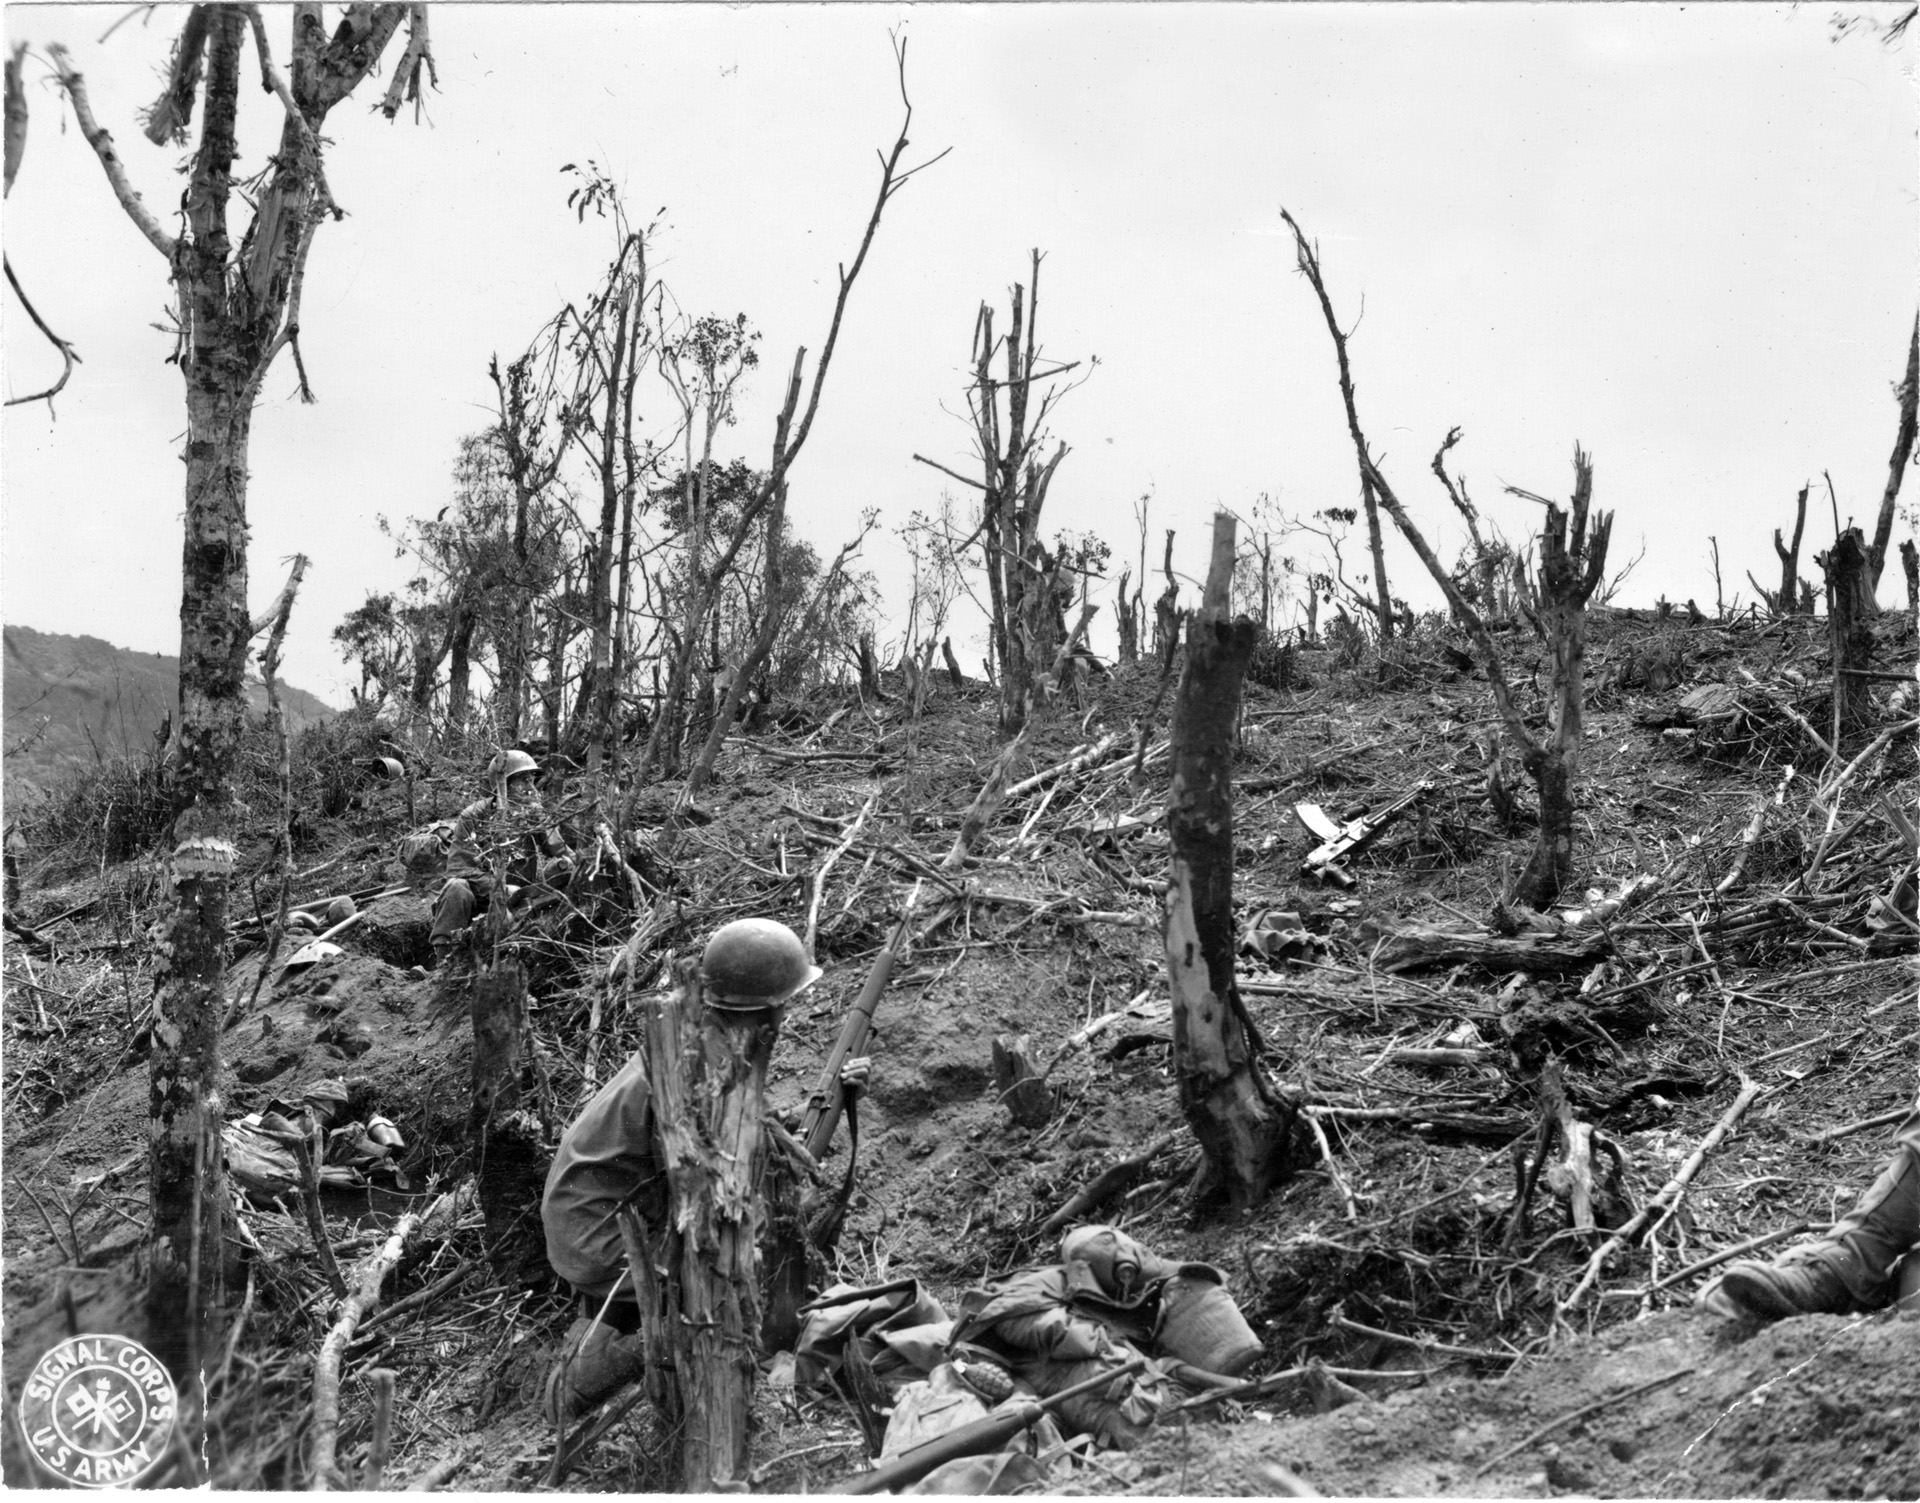 Soldiers of the 32nd Infantry Division are shown during combat operations on the island of Luzon in the Philippines in April 1945. The 32nd Division recorded the highest number of days in a combat zone of any American division during World War II: 654 days in the Pacific while fighting the Japanese.